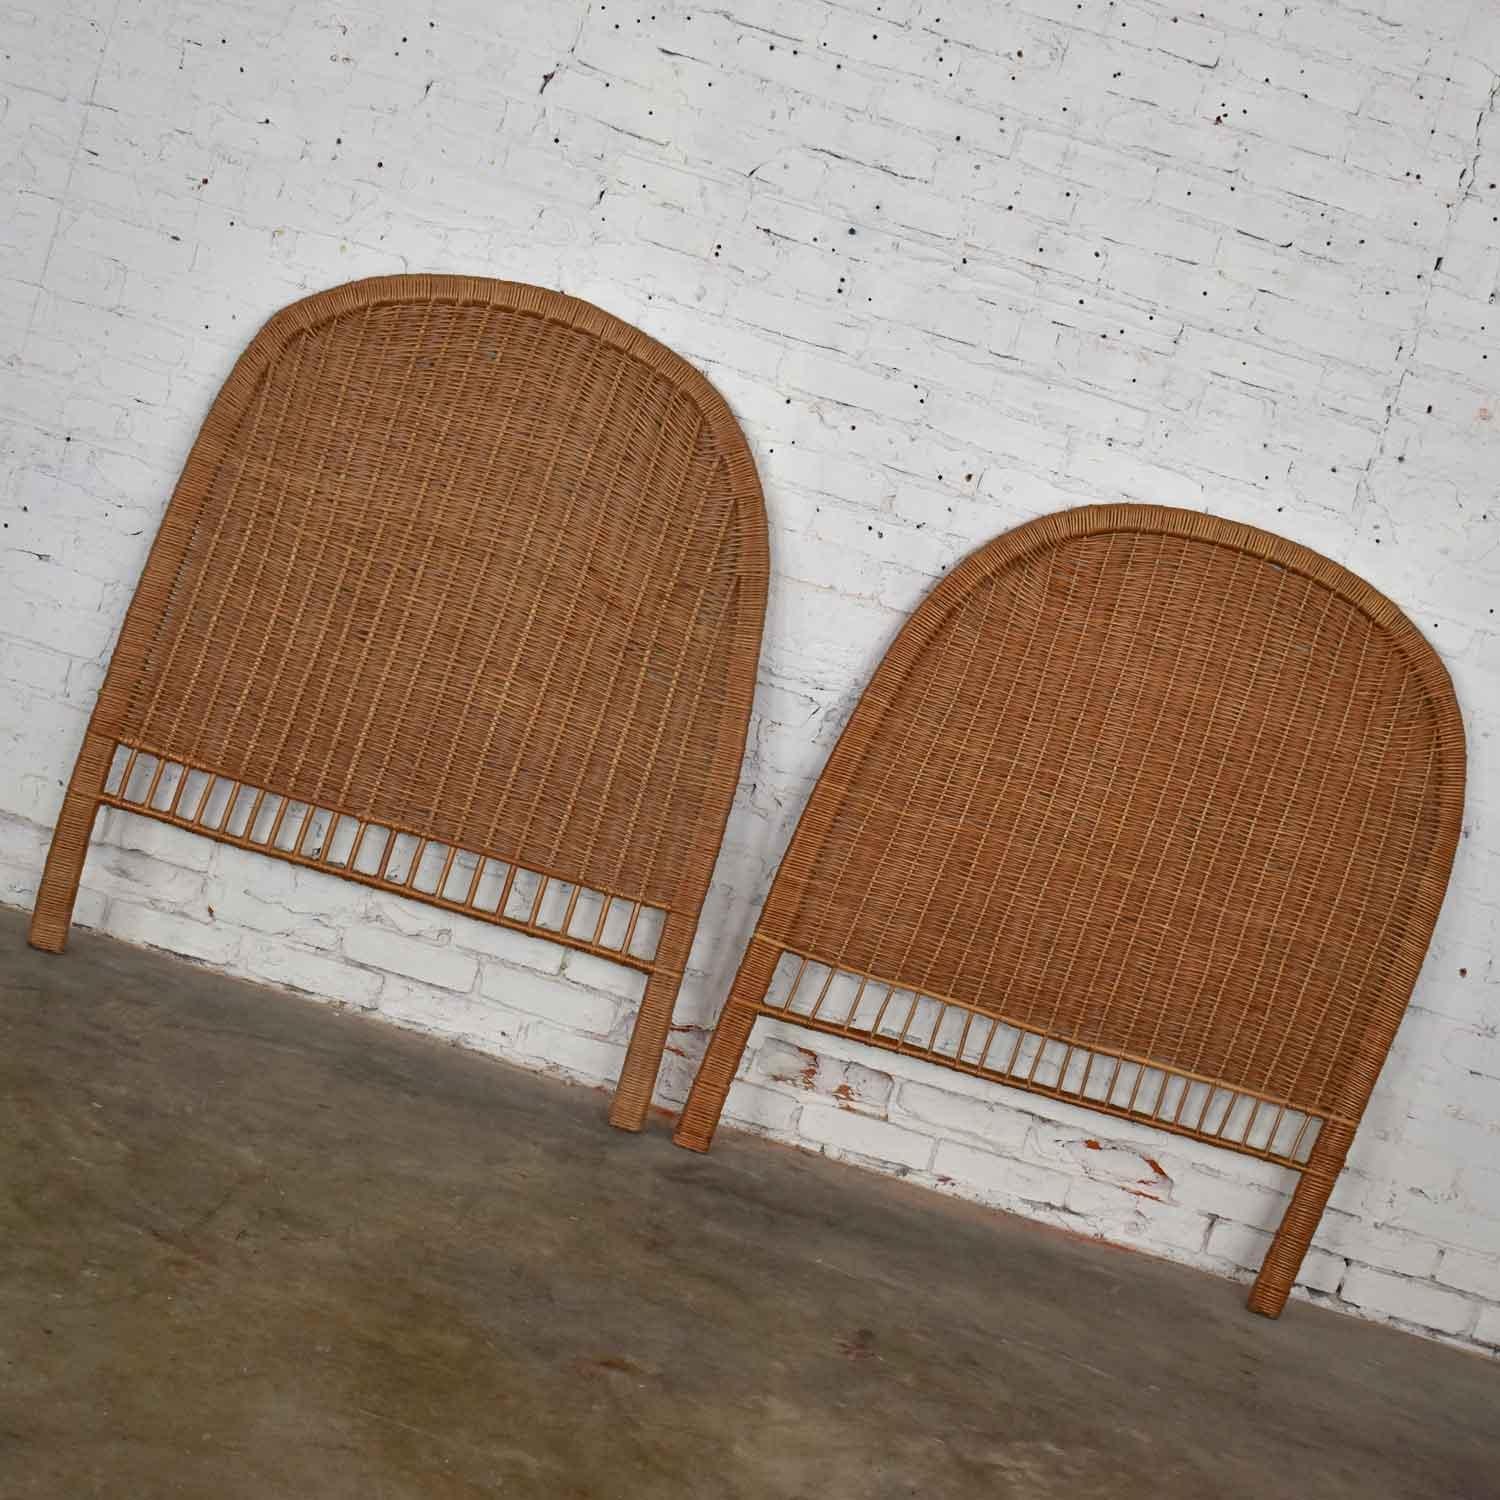 Charming pair of boho chic organic modern twin wicker headboards. Beautiful vintage condition. The wicker of the arched headboards has flexed a little over time as you would expect with use and wear. We have done some minor repair on a bit of the